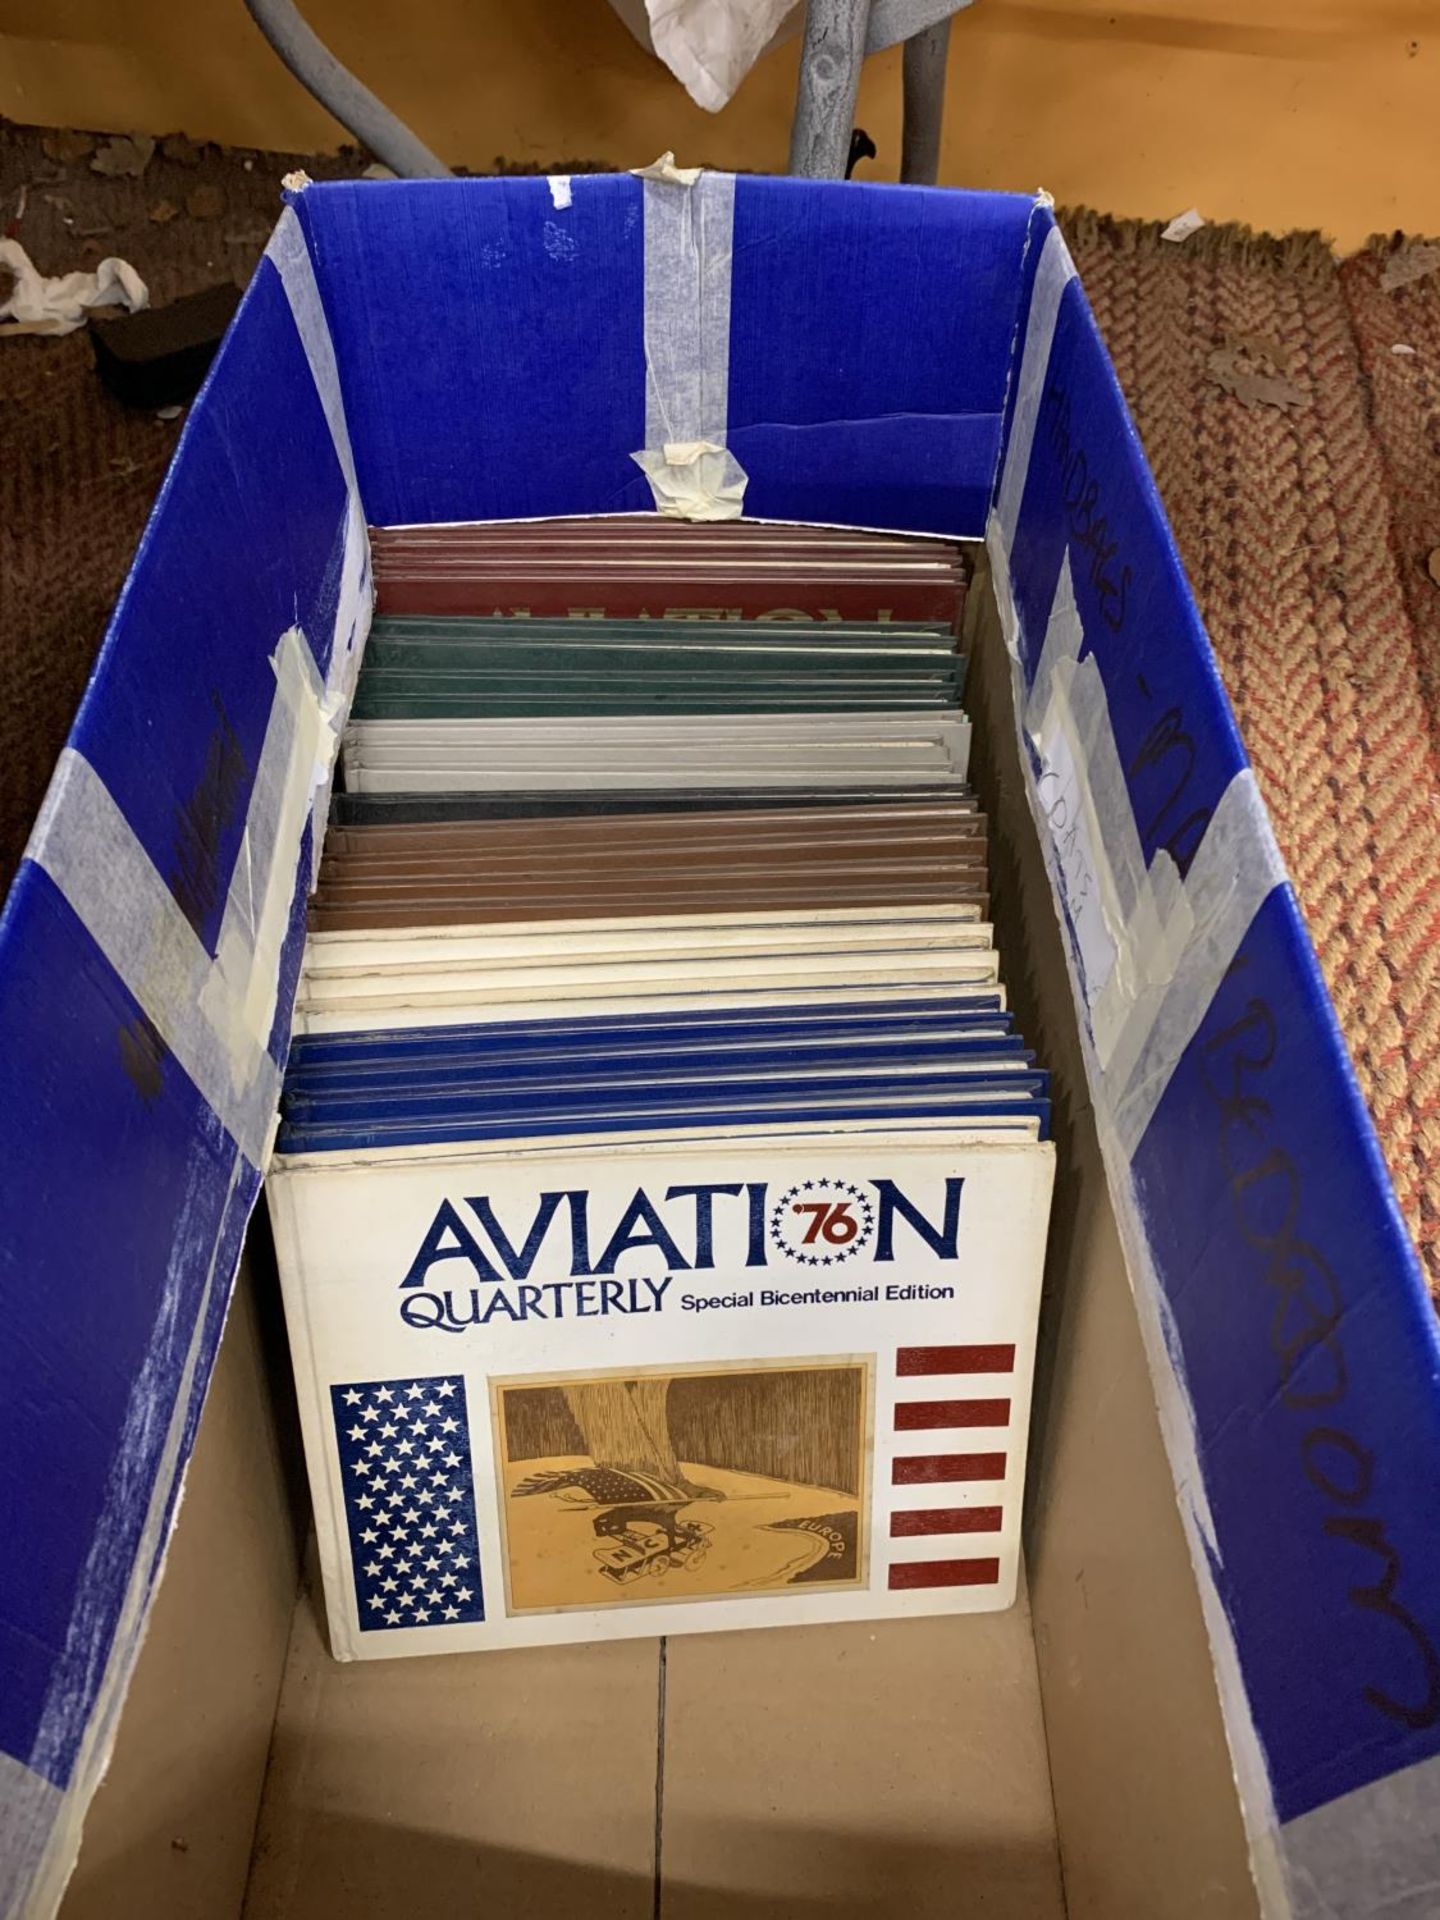 A LARGE COLLECTION OF 'AVIATION QUARTERLY' BOOKS - 24 IN TOTAL